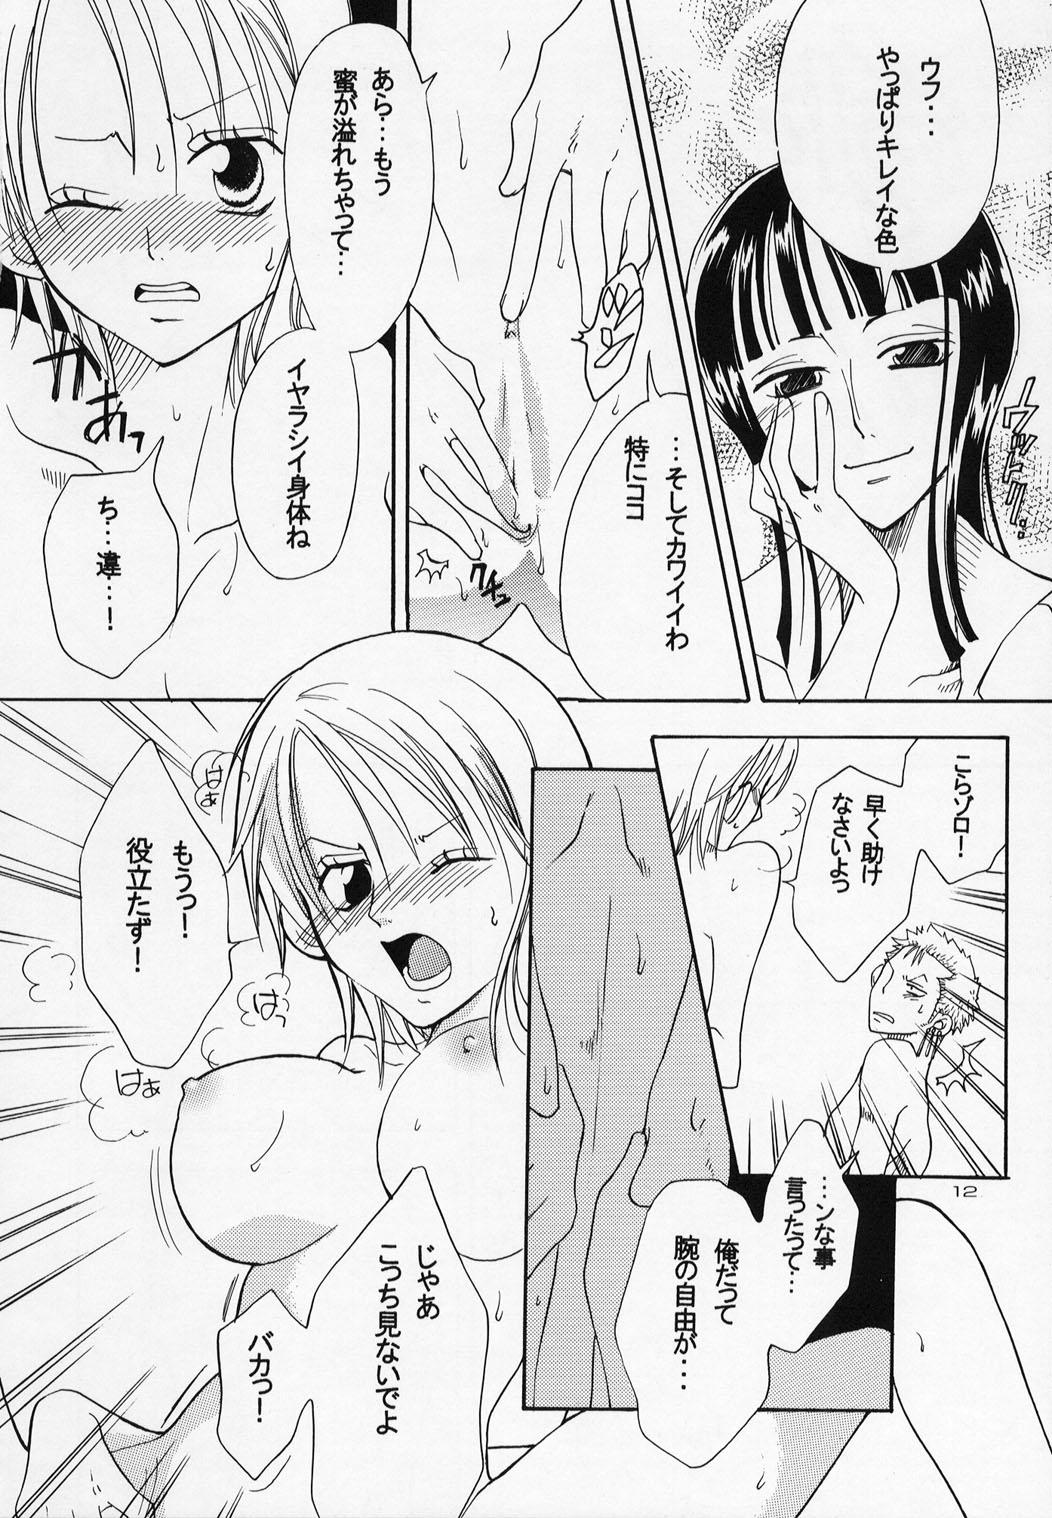 Ballbusting Shiawase Punch! 4 - One piece Movies - Page 12